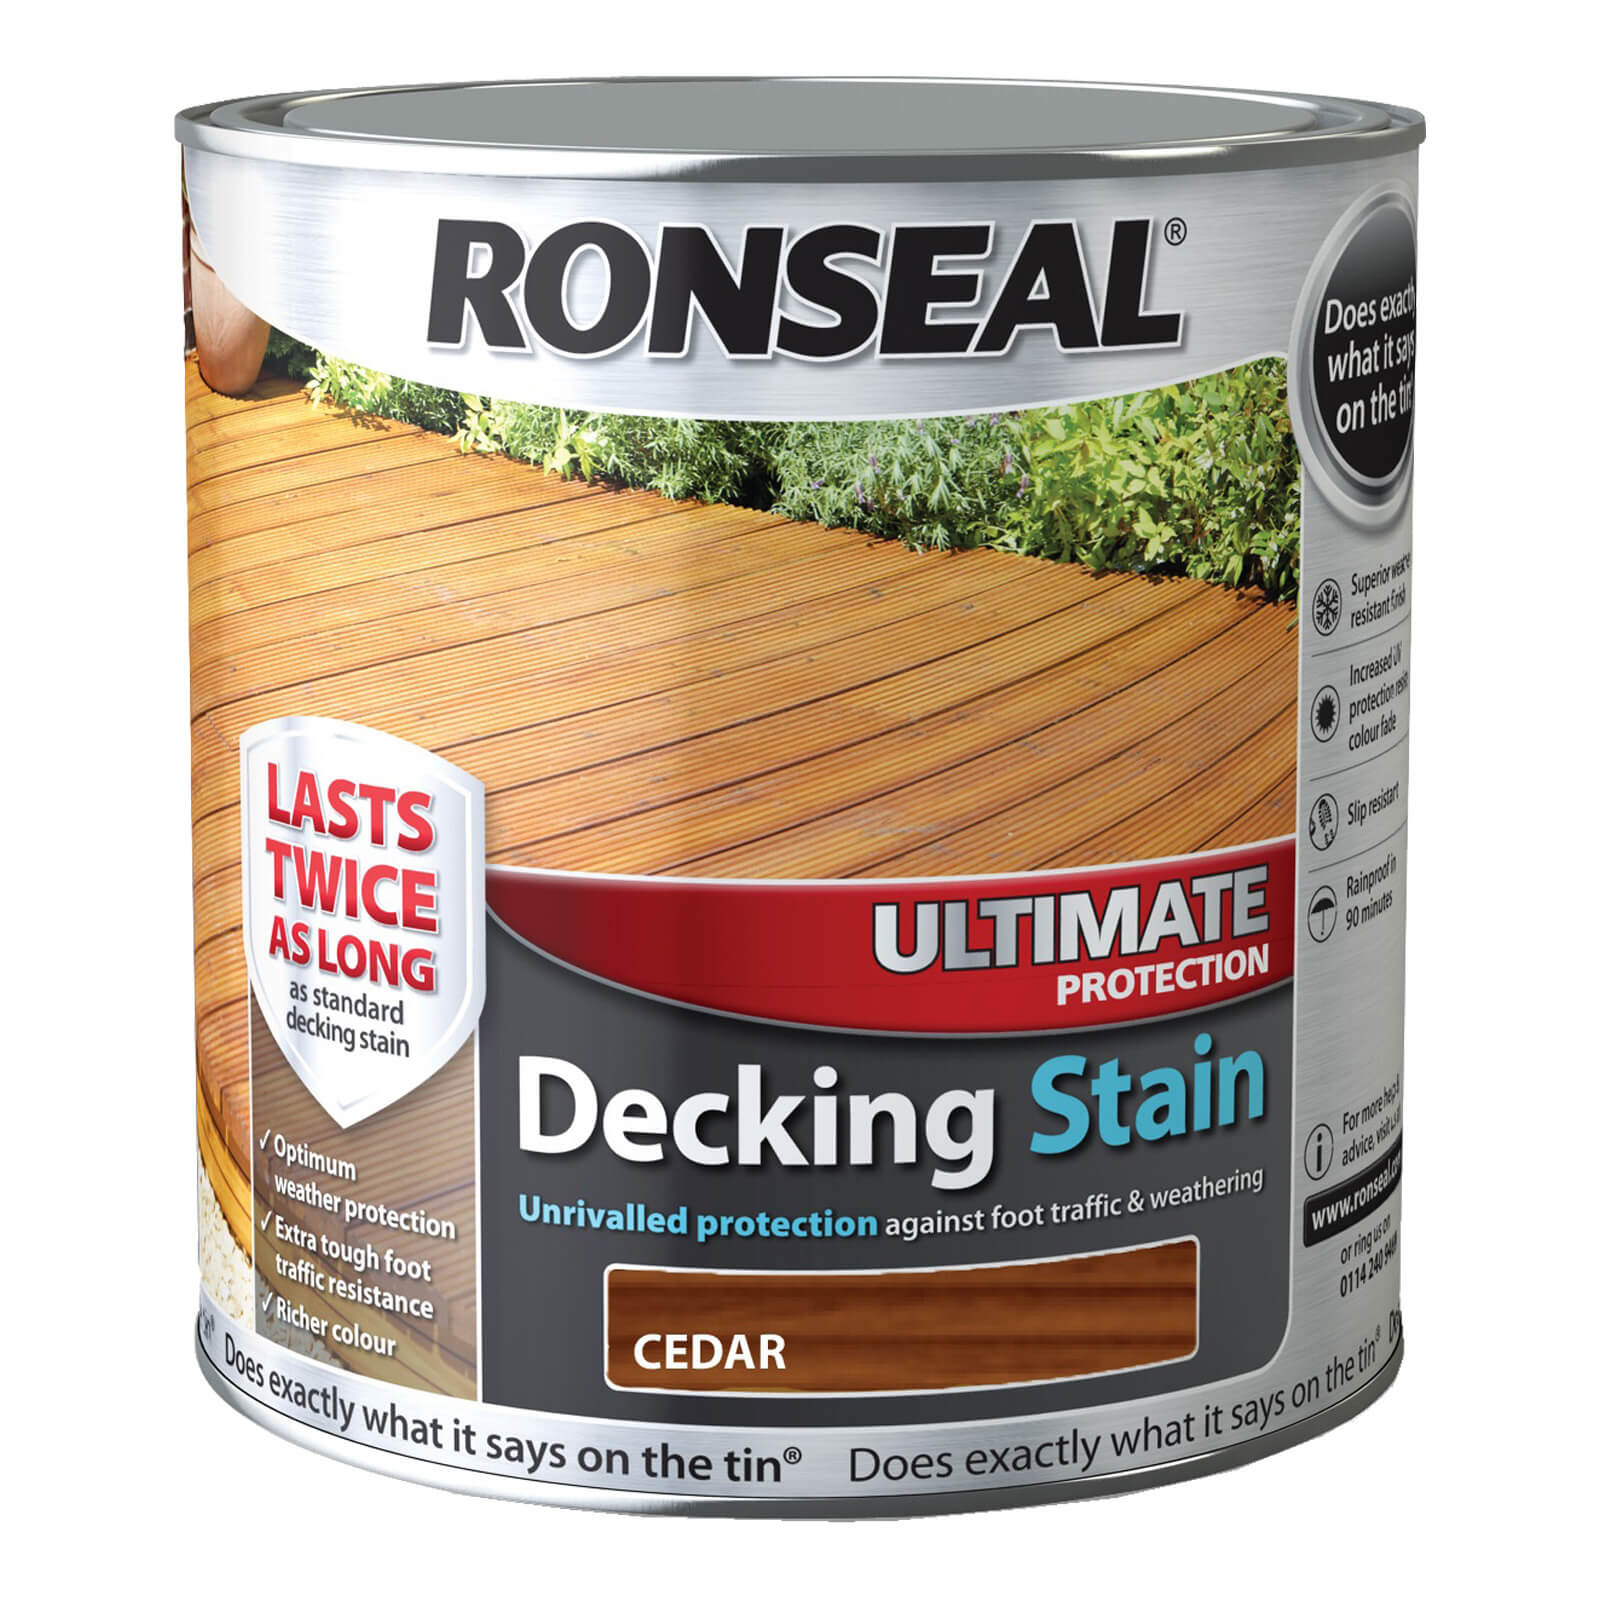 Ronseal Ultimate Protection Decking Stain Cedar - 2.5L